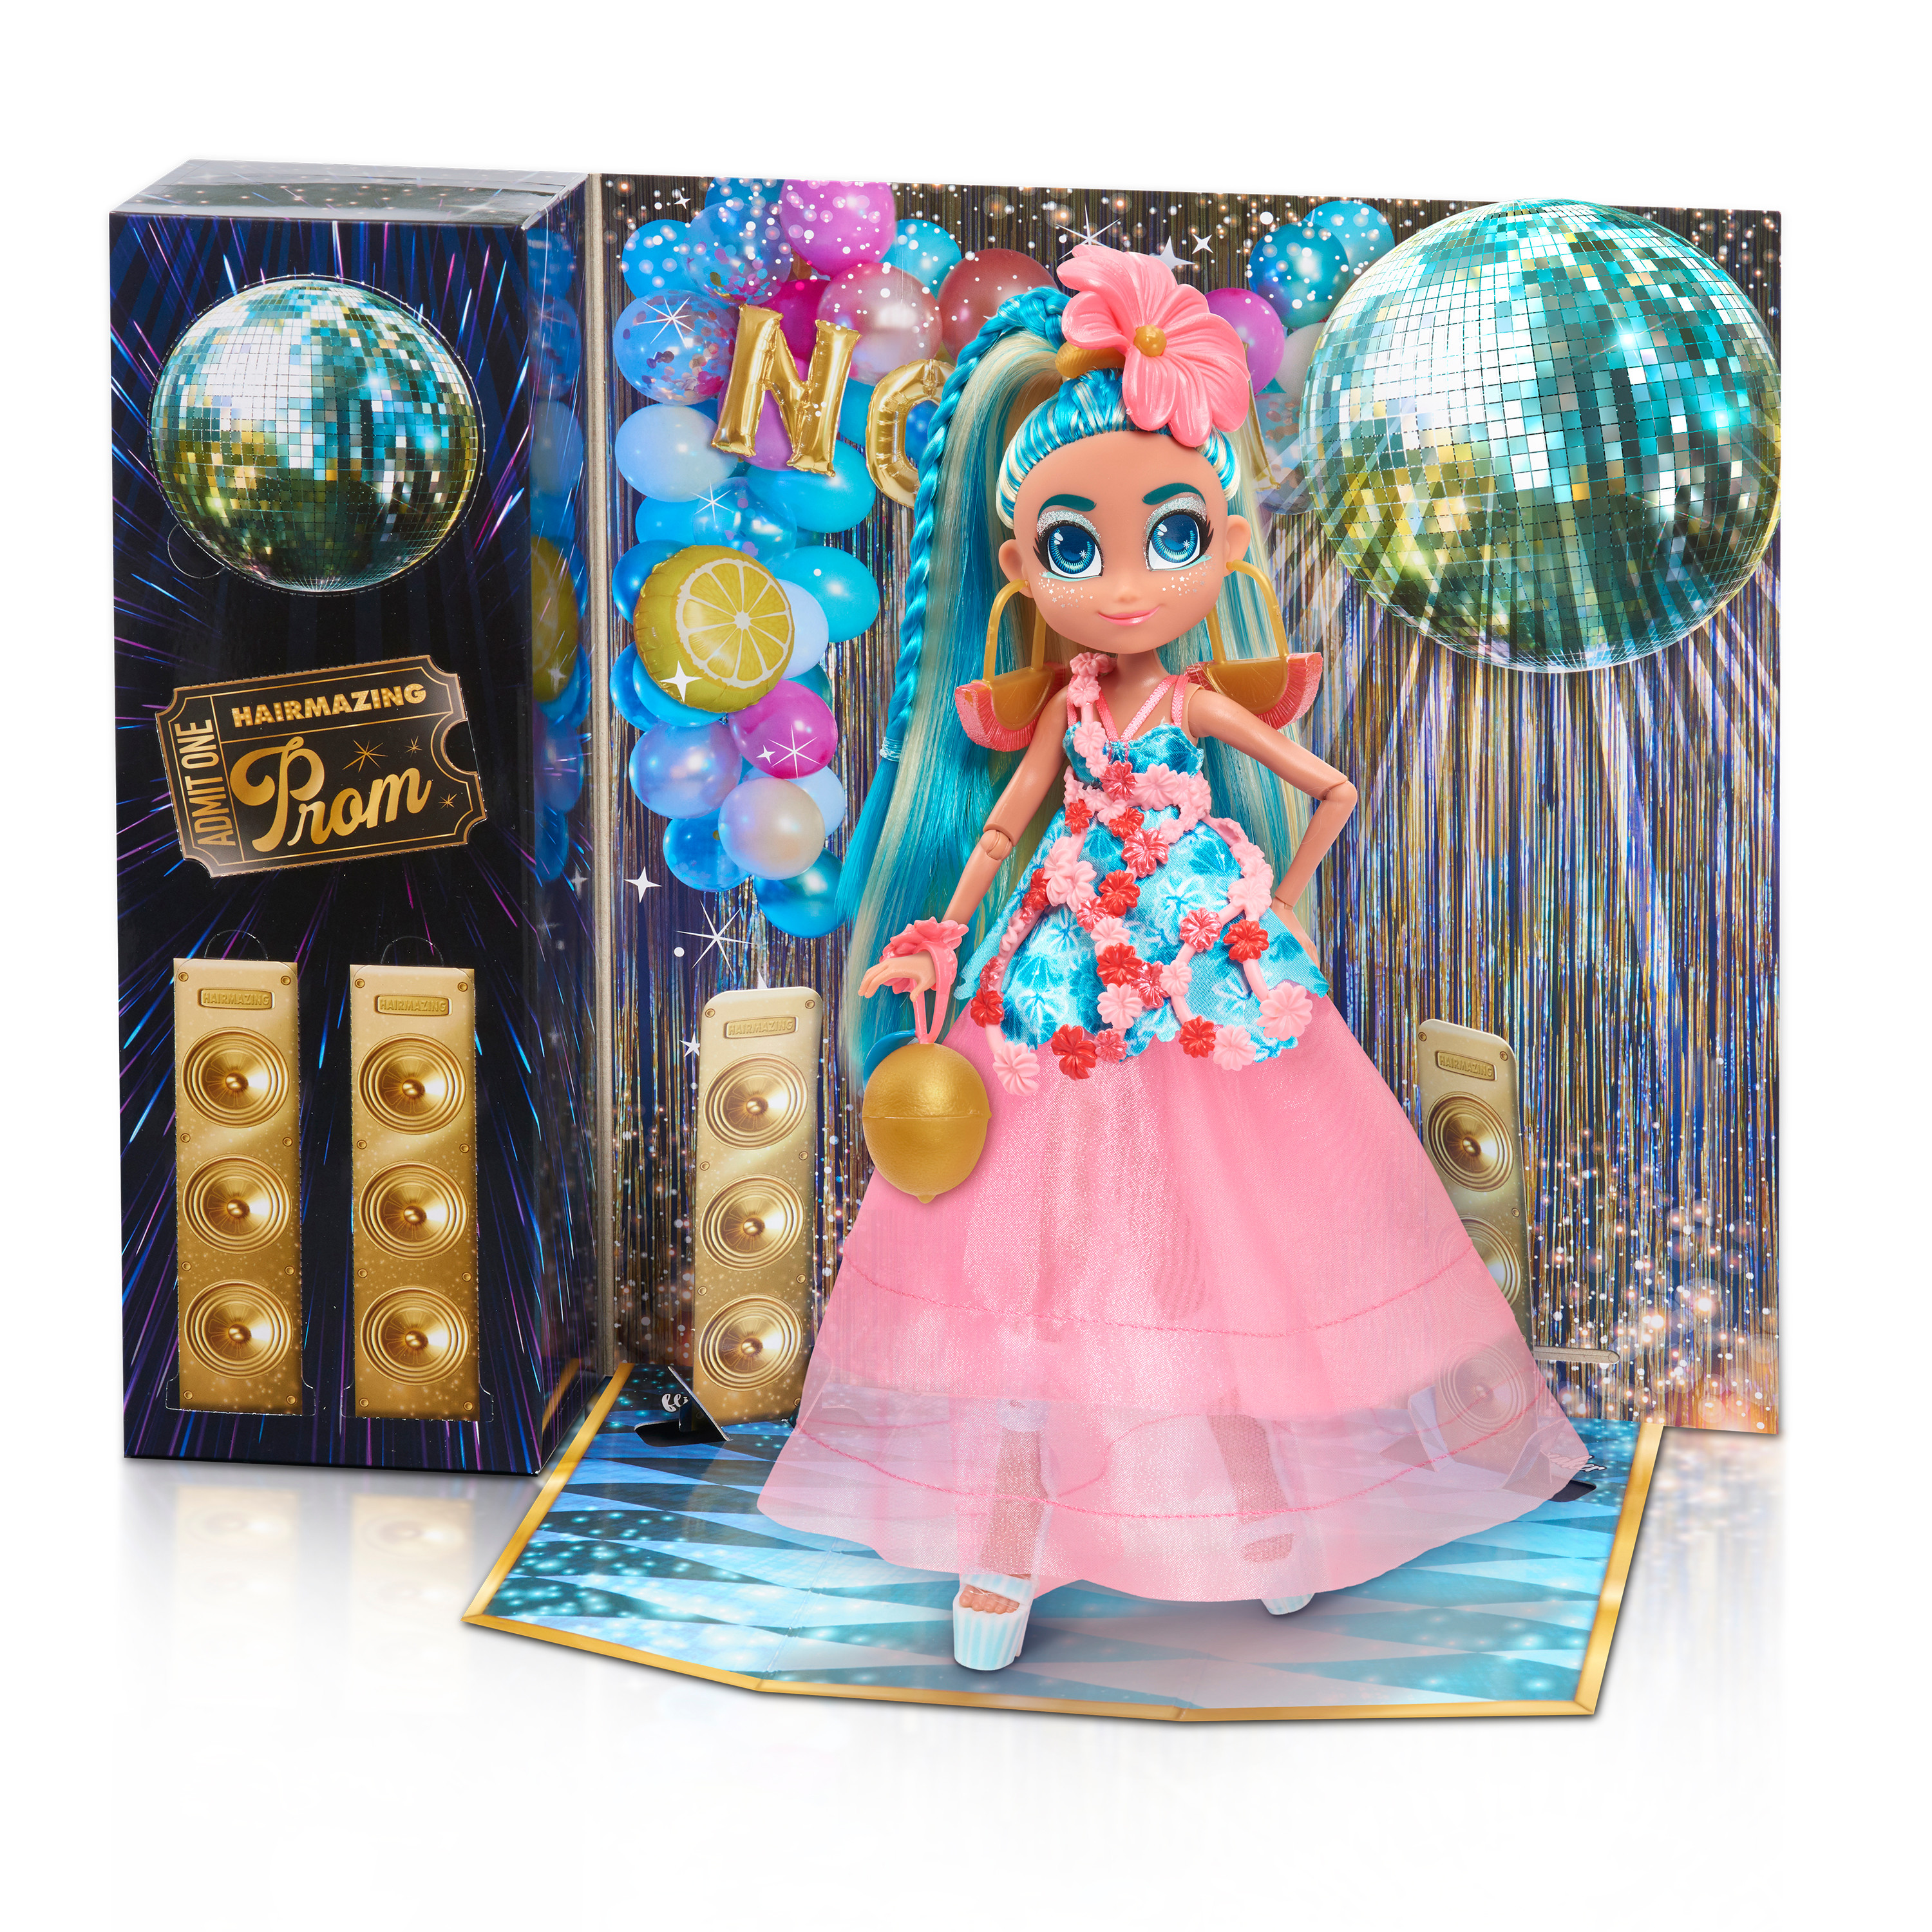 Hairdorables Hairmazing Prom Perfect Fashion Dolls, Noah, Blue and Blonde Hair,  Kids Toys for Ages 3 Up, Gifts and Presents - image 3 of 3